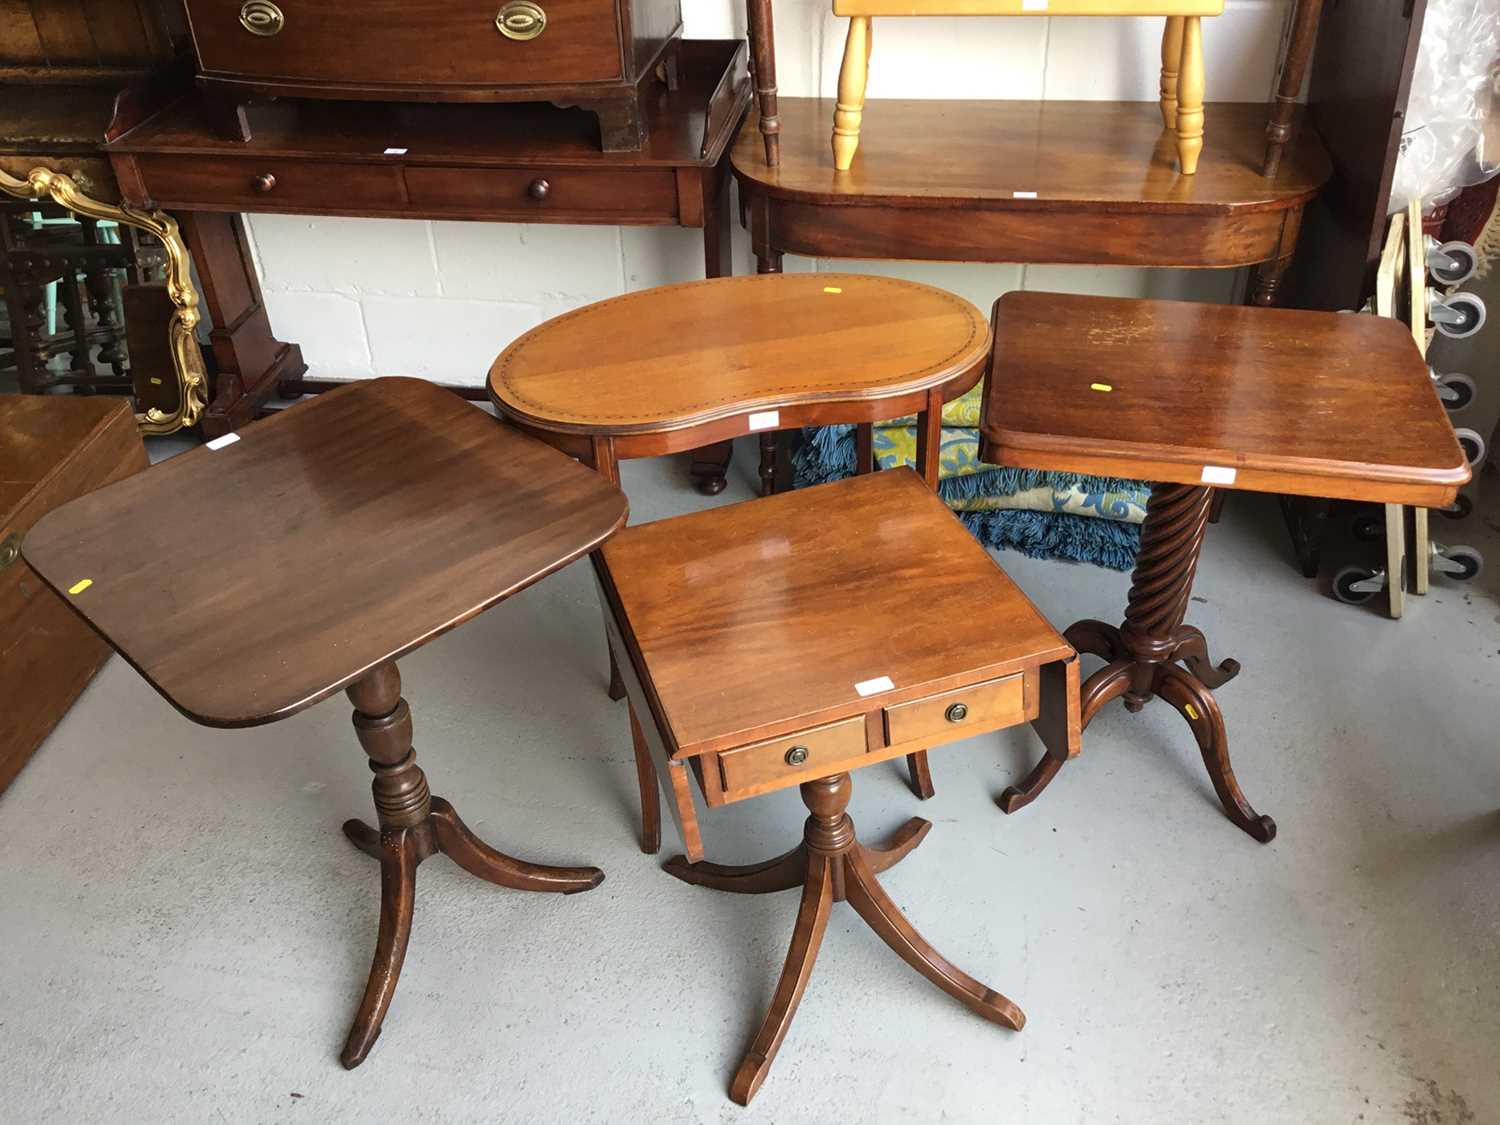 Lot 47 - Edwardian Mahogany kidney shaped two tier occasional table, together with a mahogany tilt top wine table, another occasional table with spiral twist column and a reproduction drop flap occasional t...